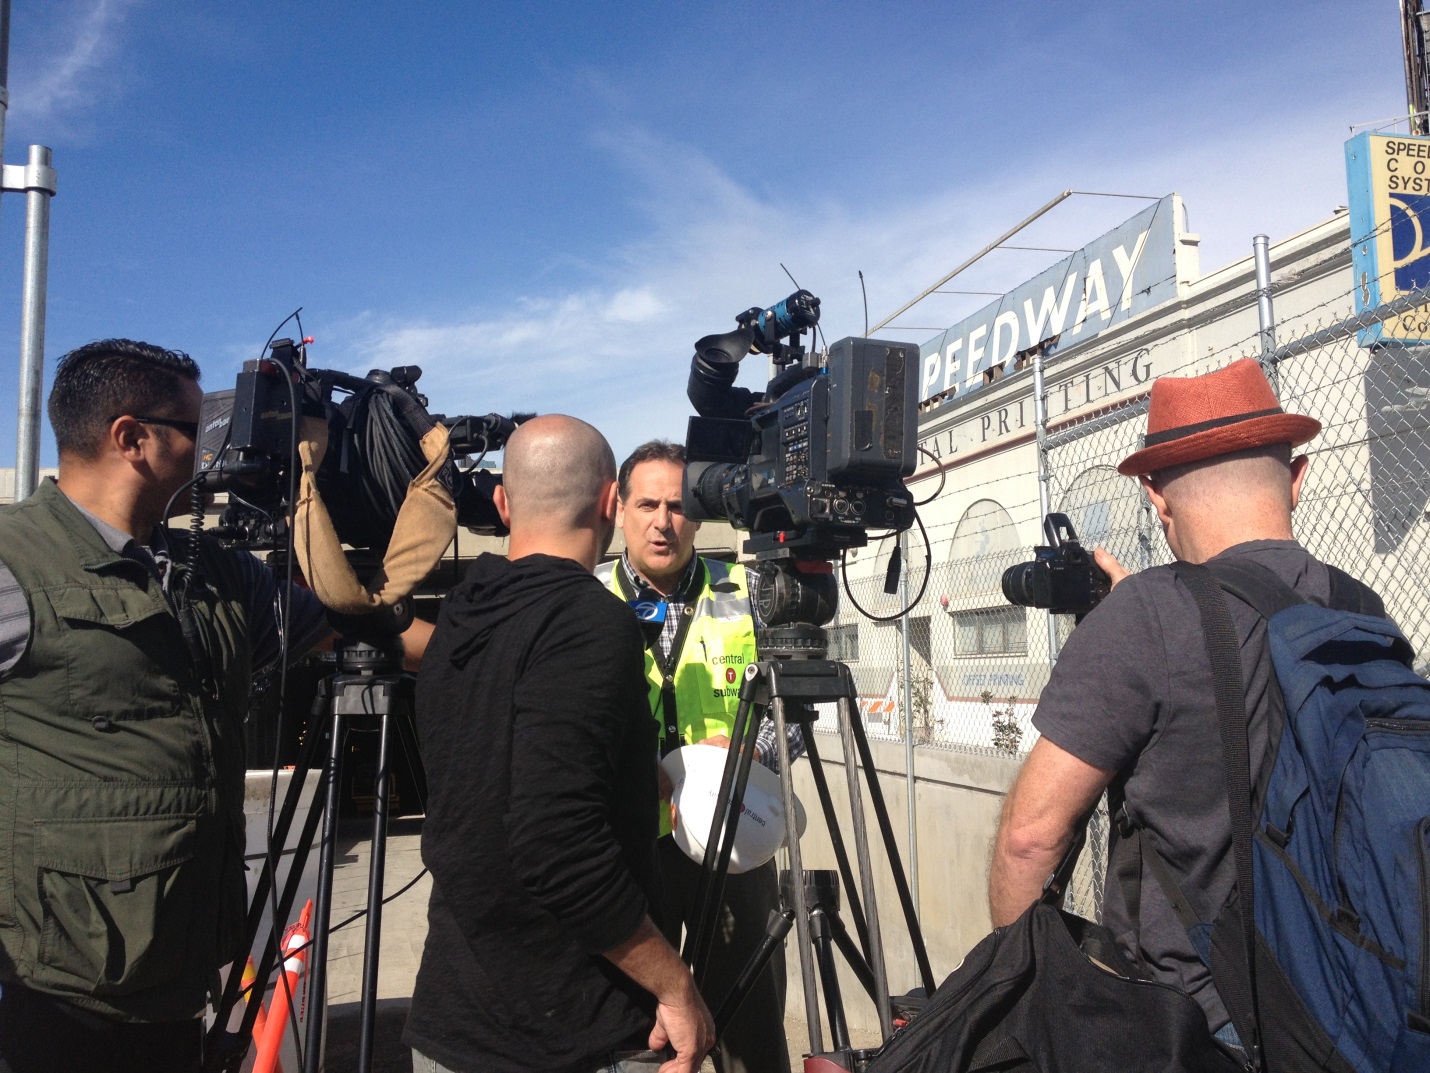 Man wearing a safety vest stands in front tv cameras and reporters.